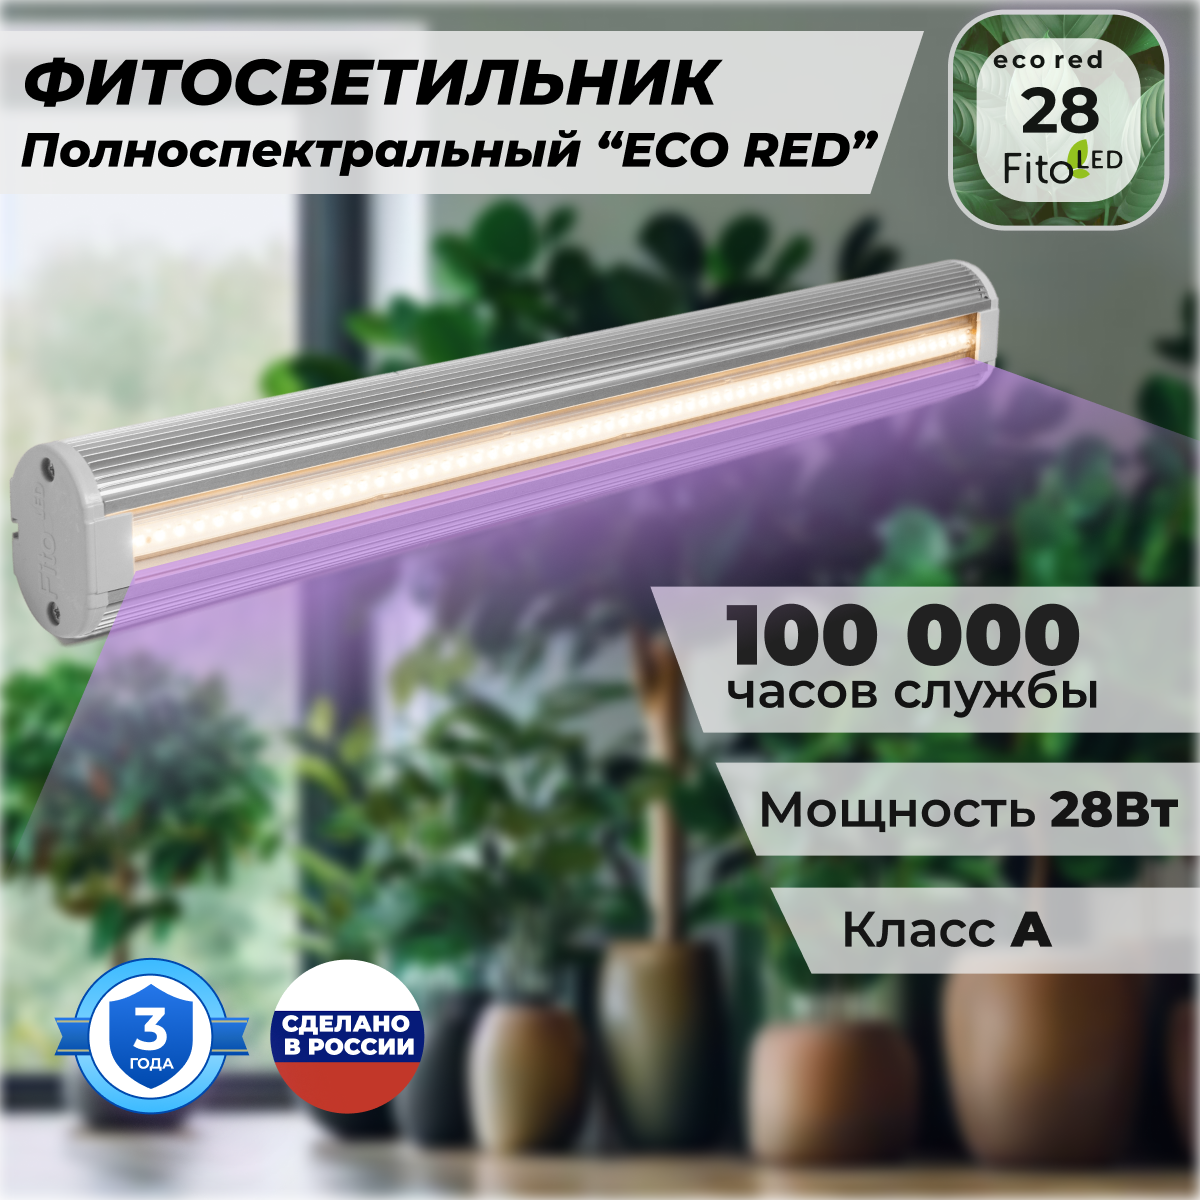 Фитосветильник FitoLED 28 Eco Red